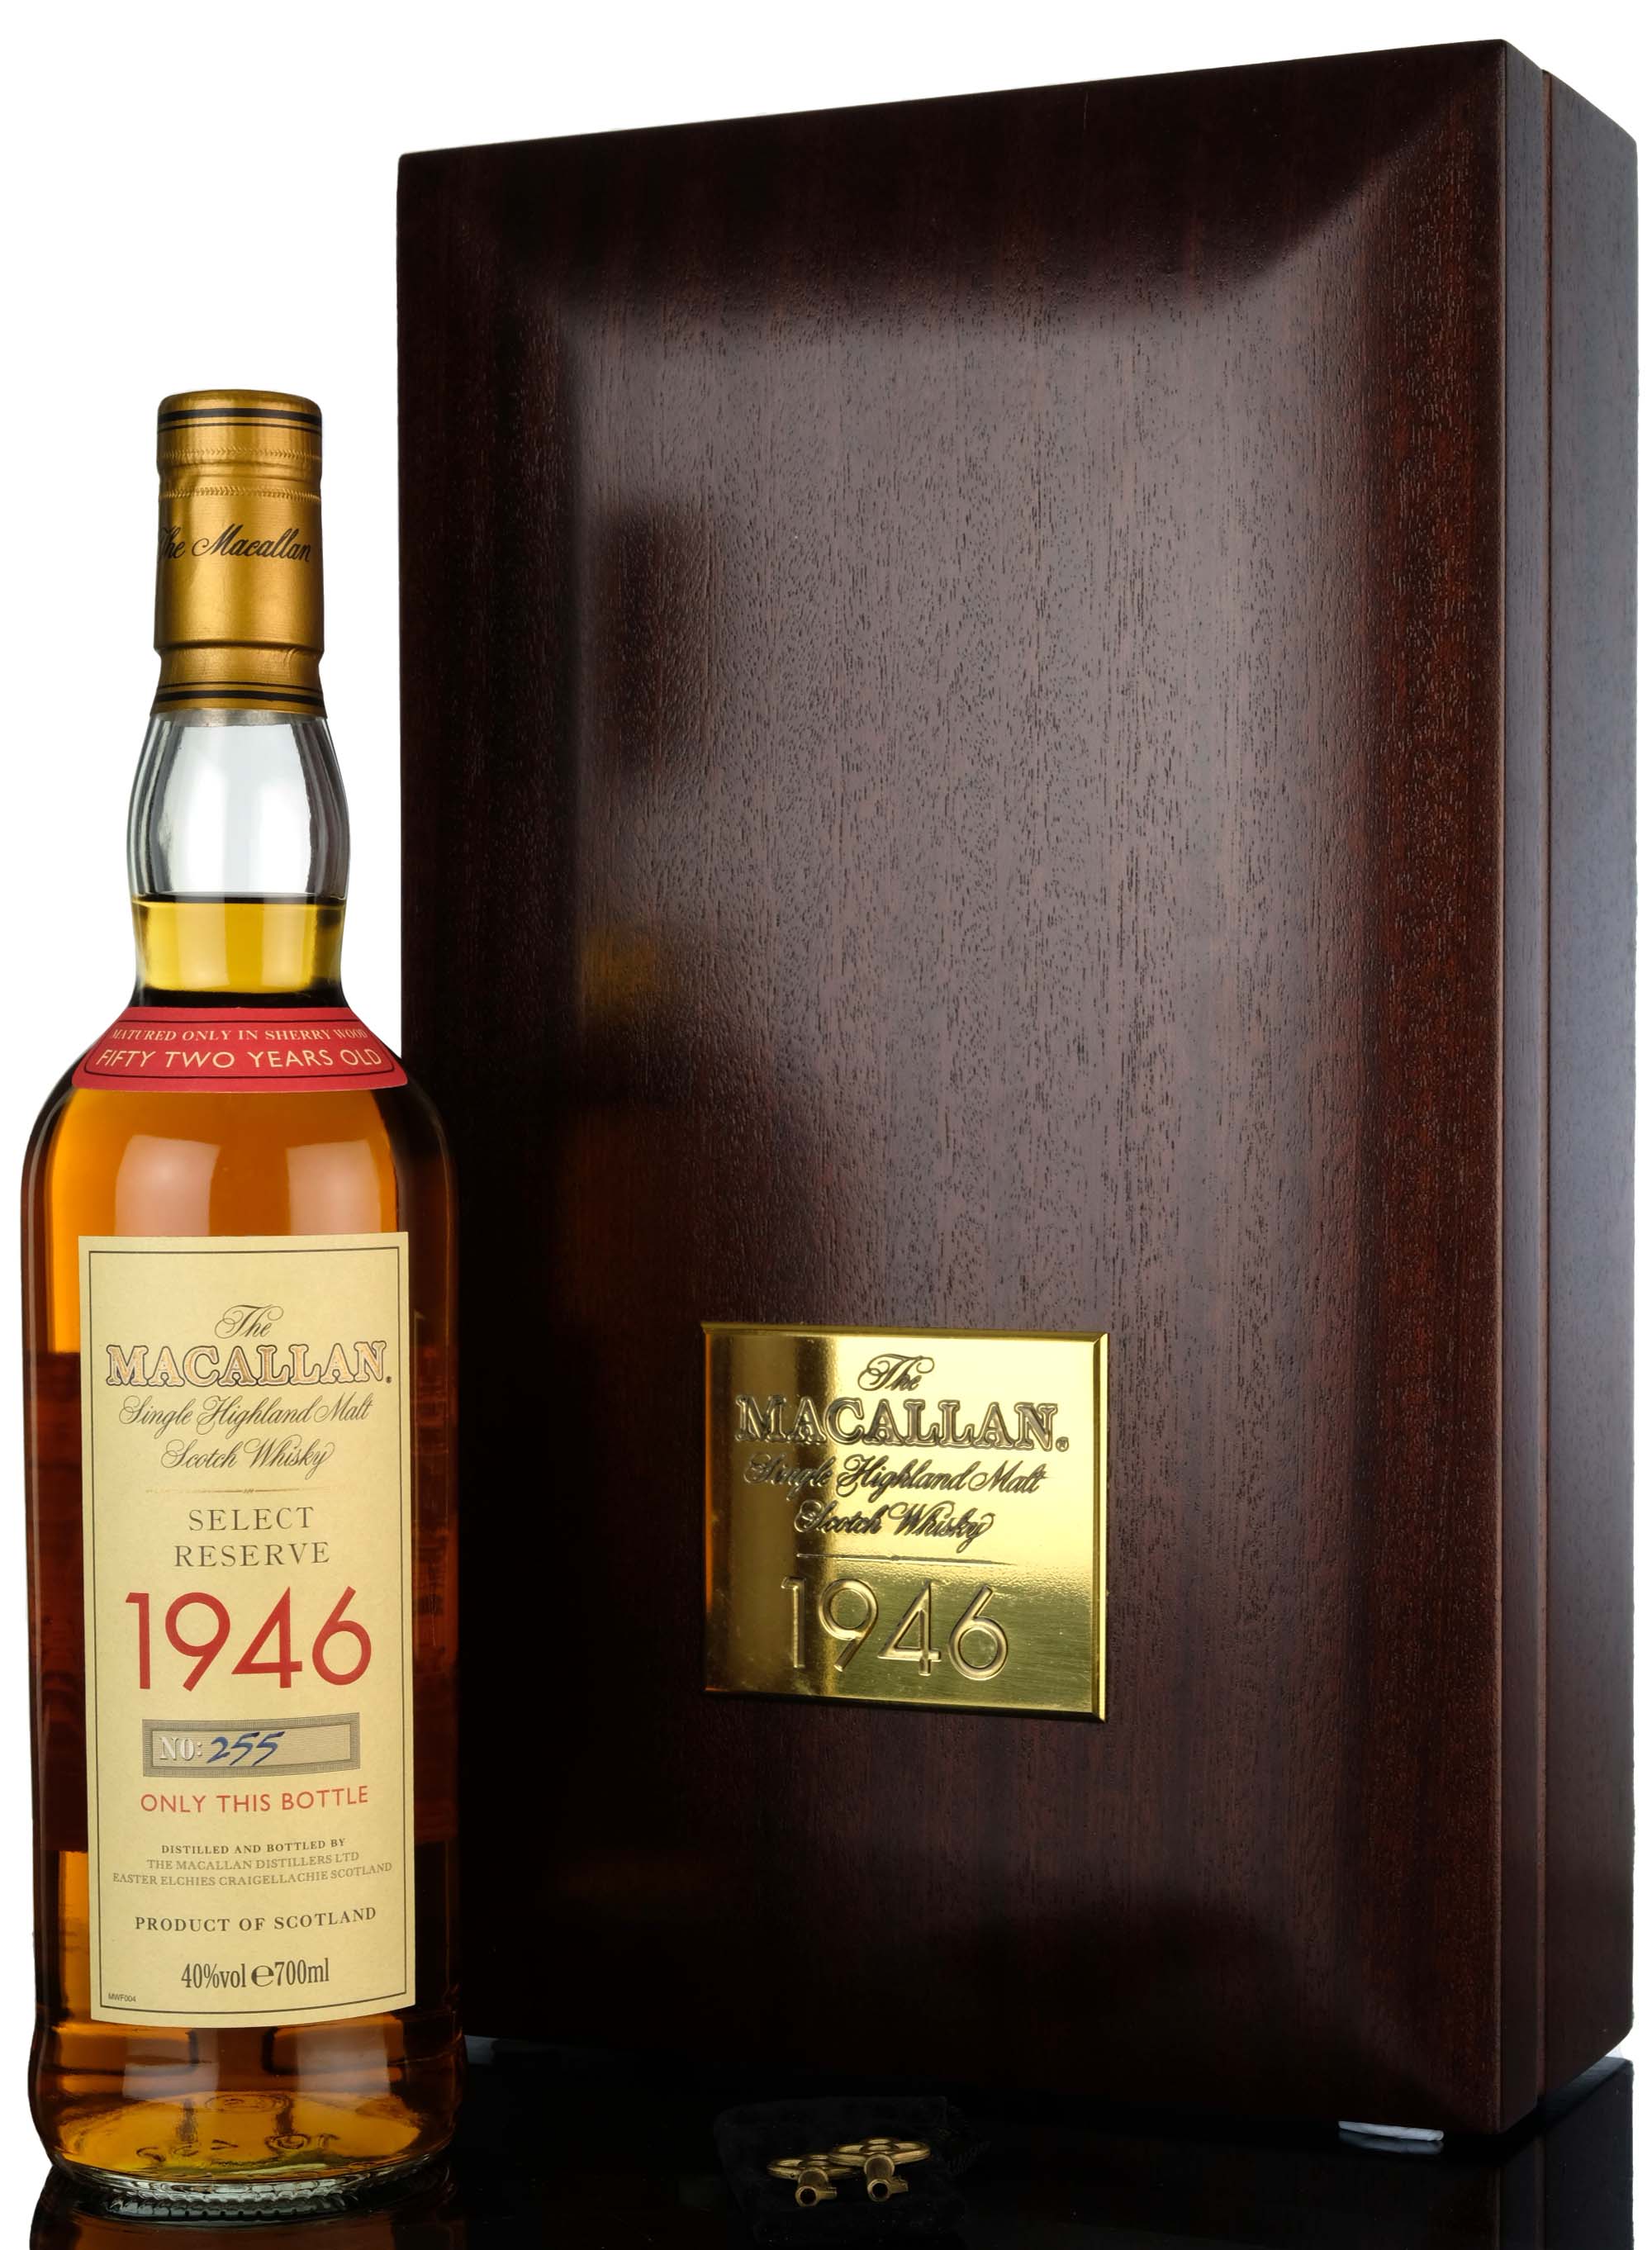 Macallan 1946-1998 - 52 Year Old - Select Reserve